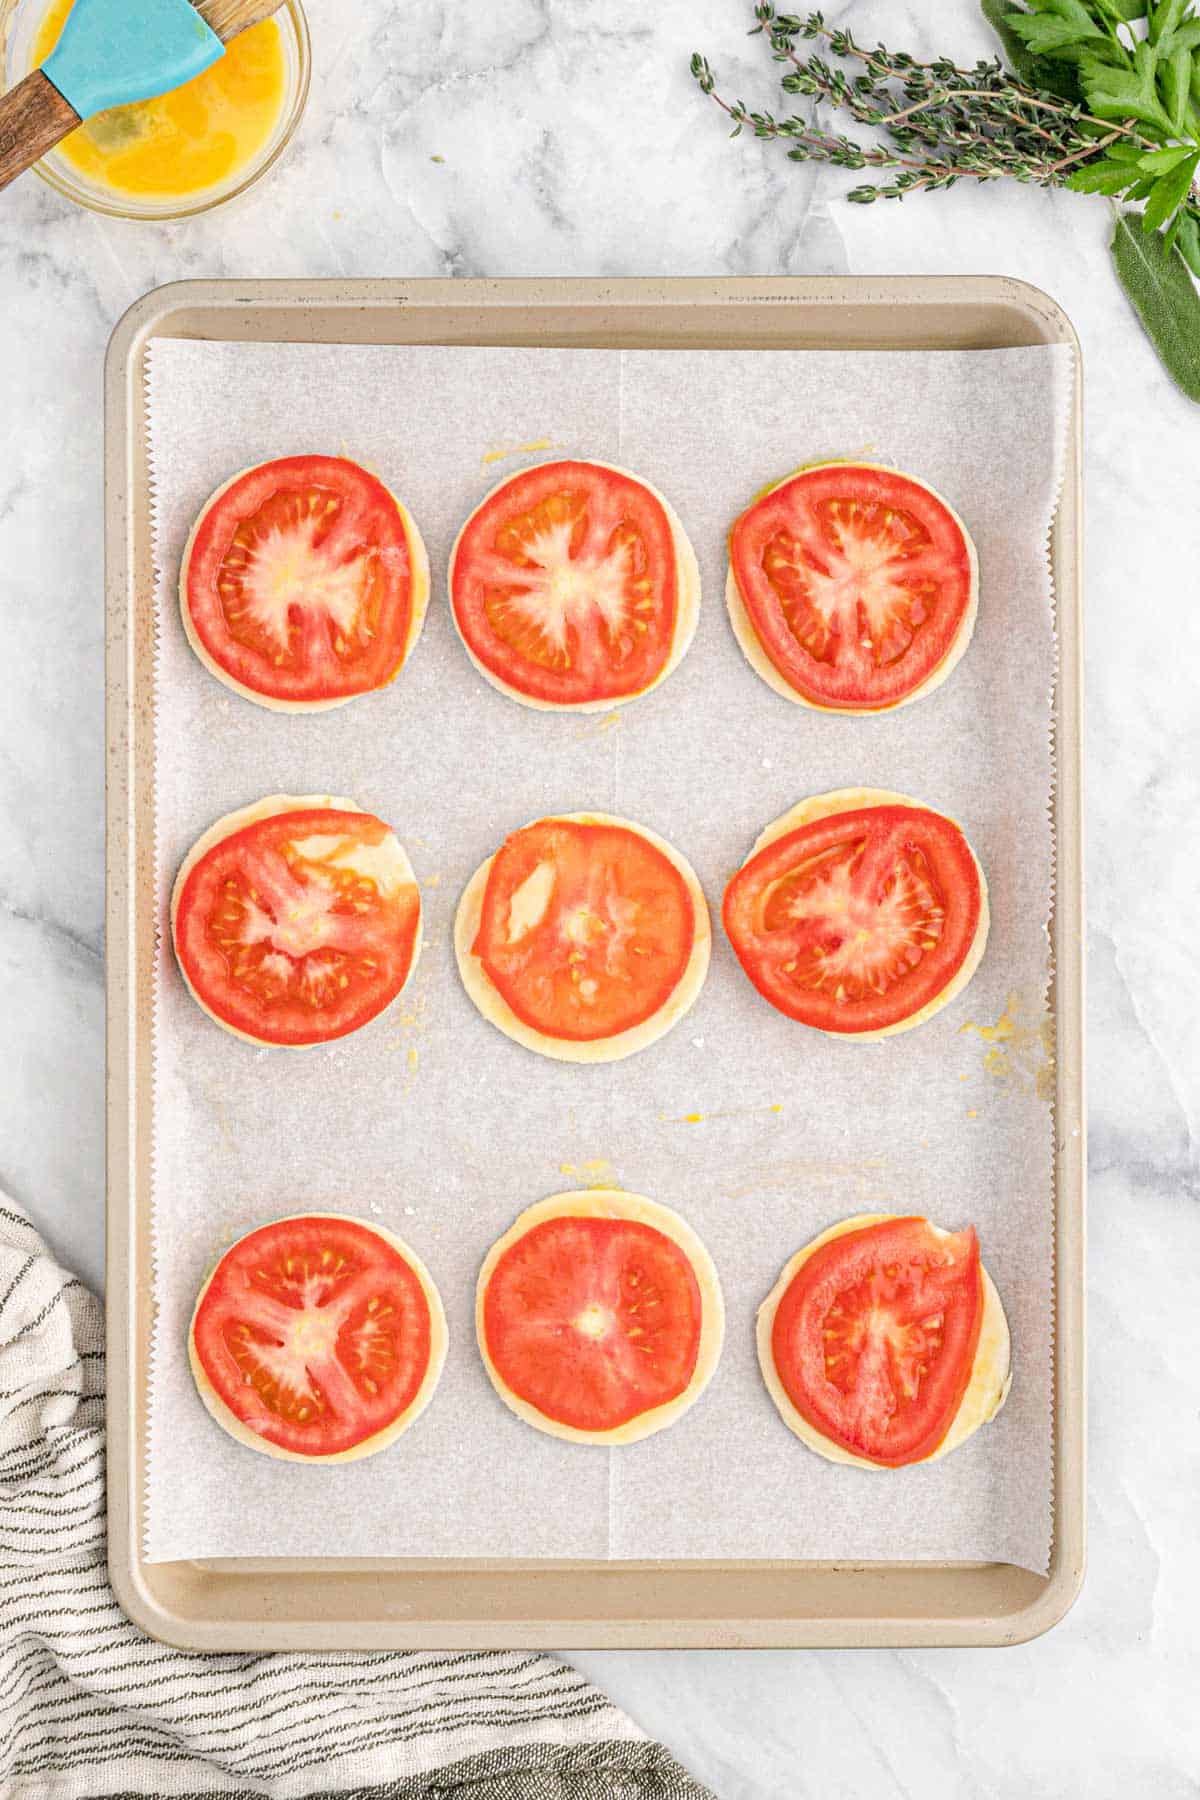 Sliced tomatoes placed on top of the puff pastry.